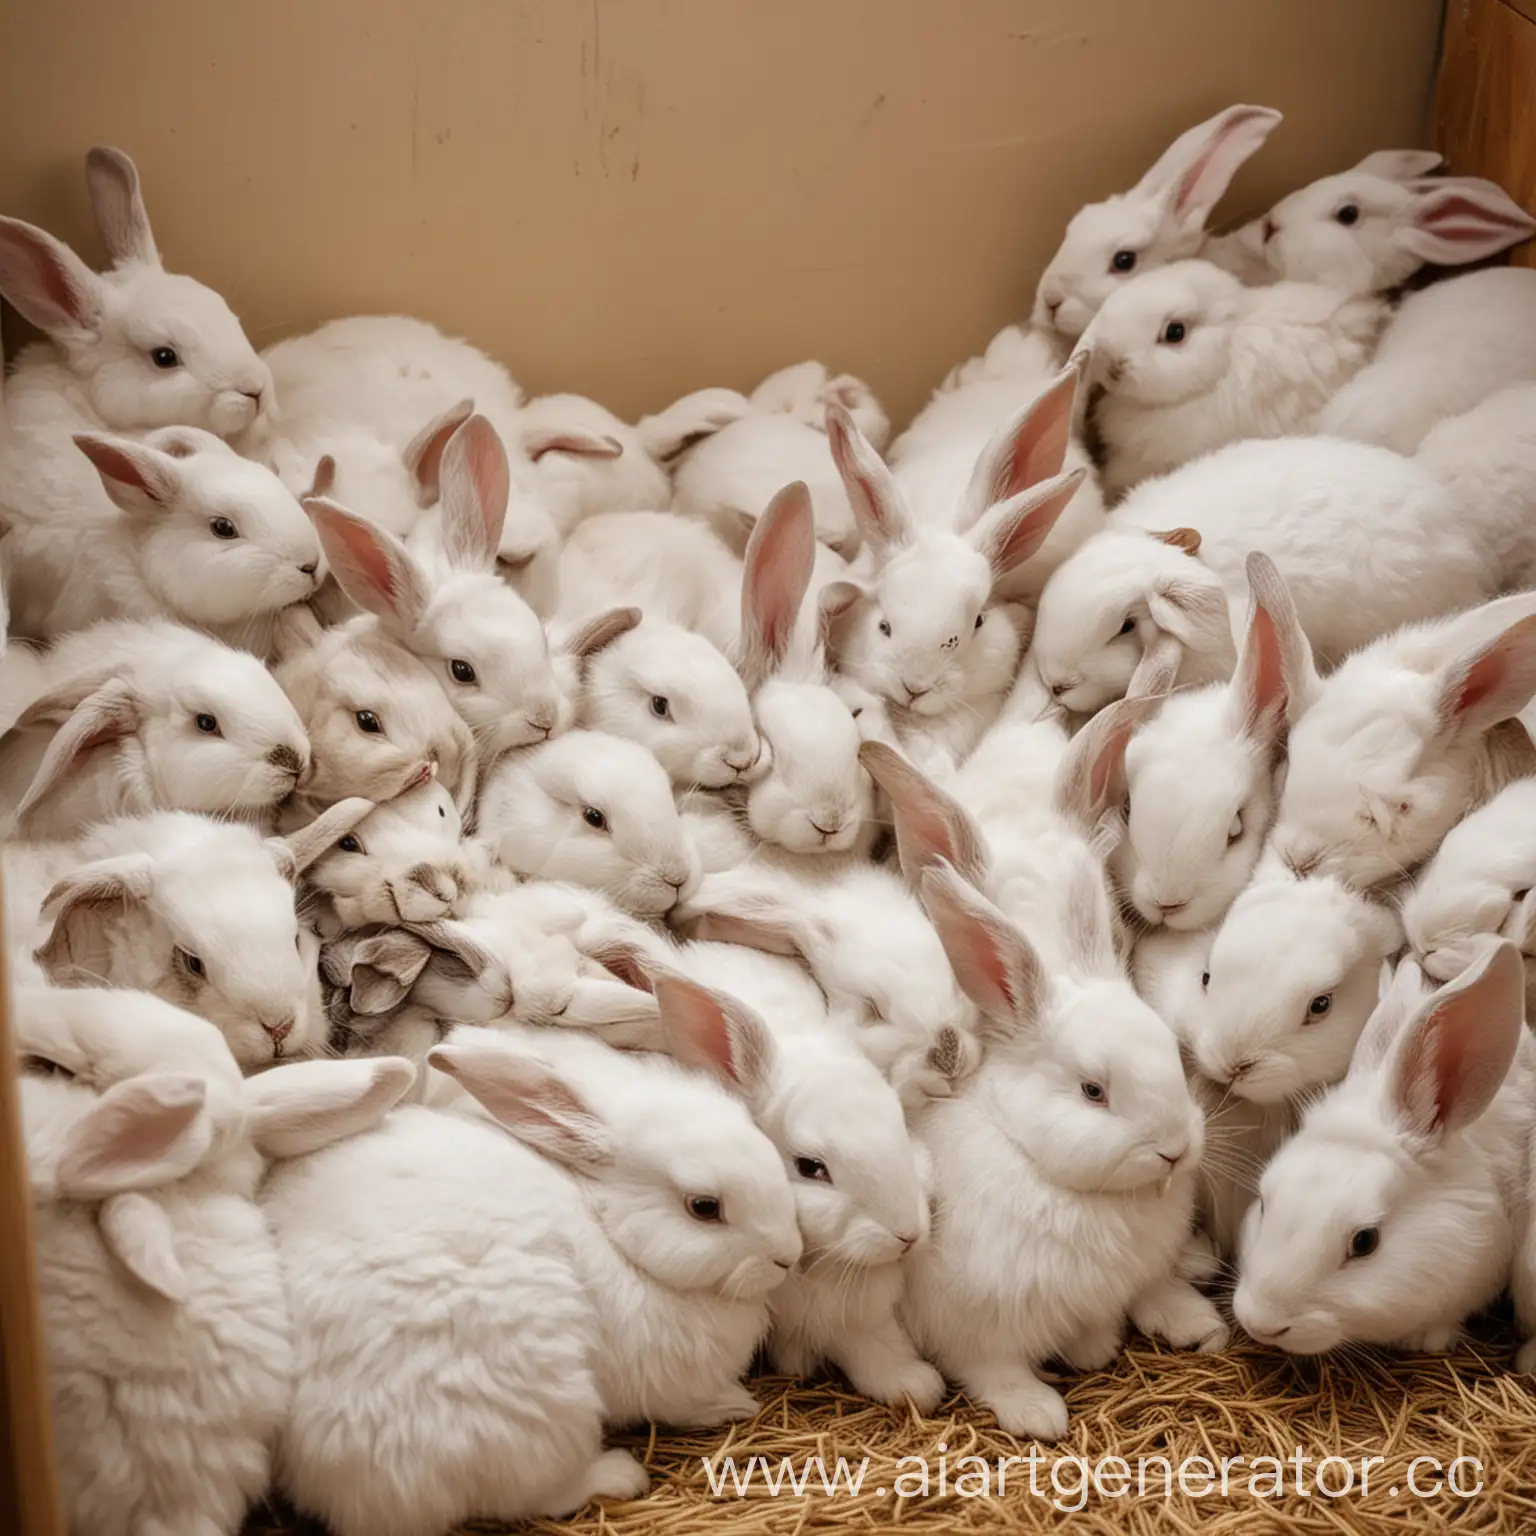 A lot of rabbits, white and fluffy, in a small room. These rabbits are squeezing each other, they are cramped in a small room.